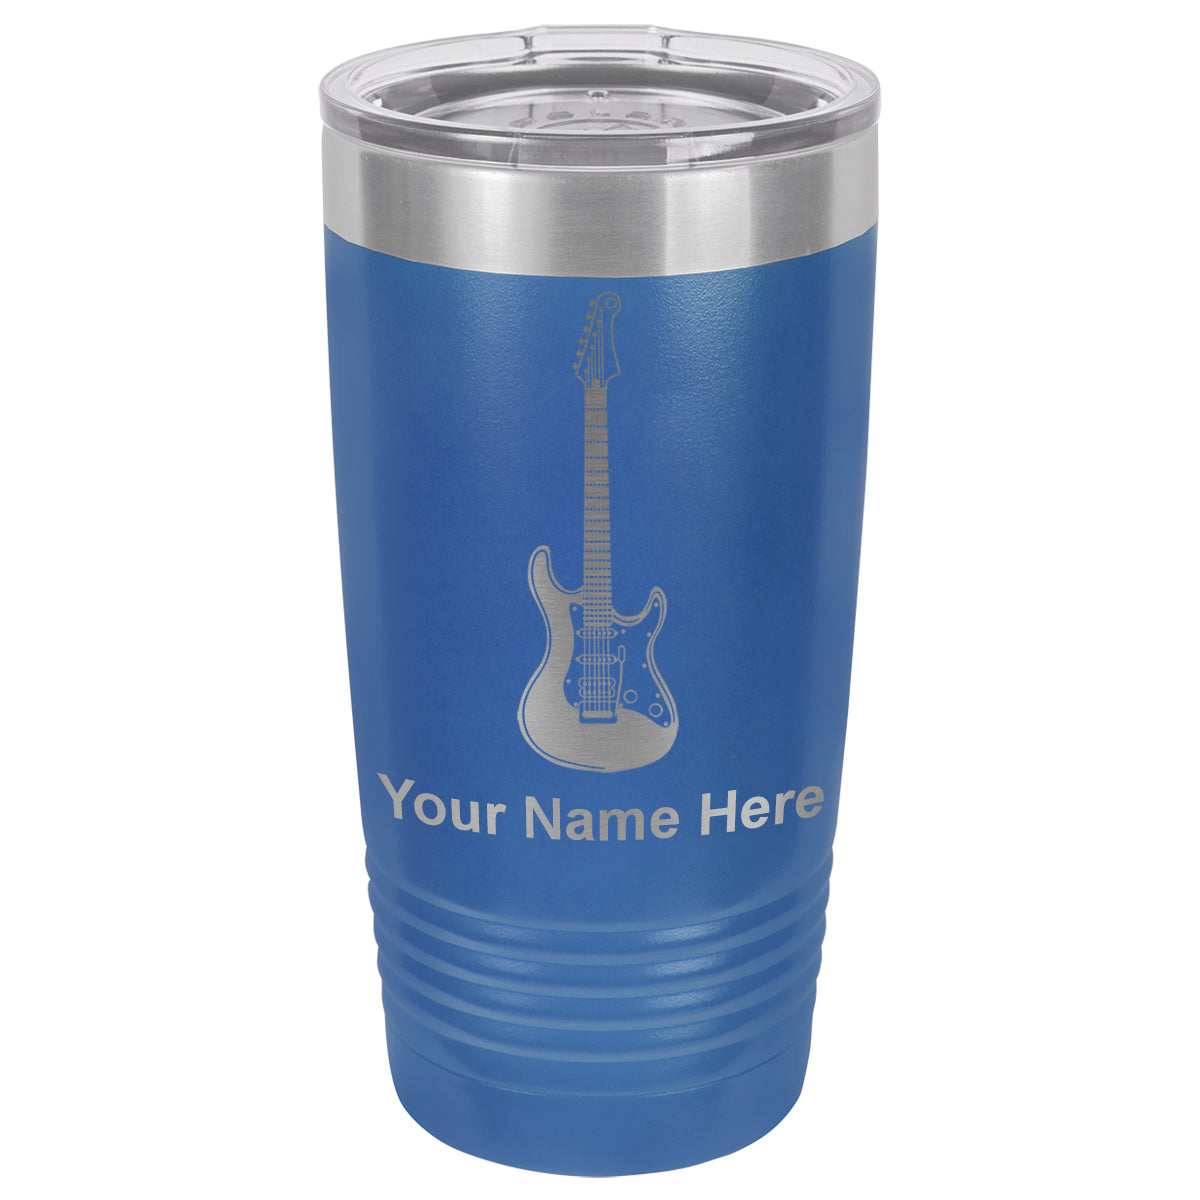 20oz Vacuum Insulated Tumbler Mug, Electric Guitar, Personalized Engraving Included